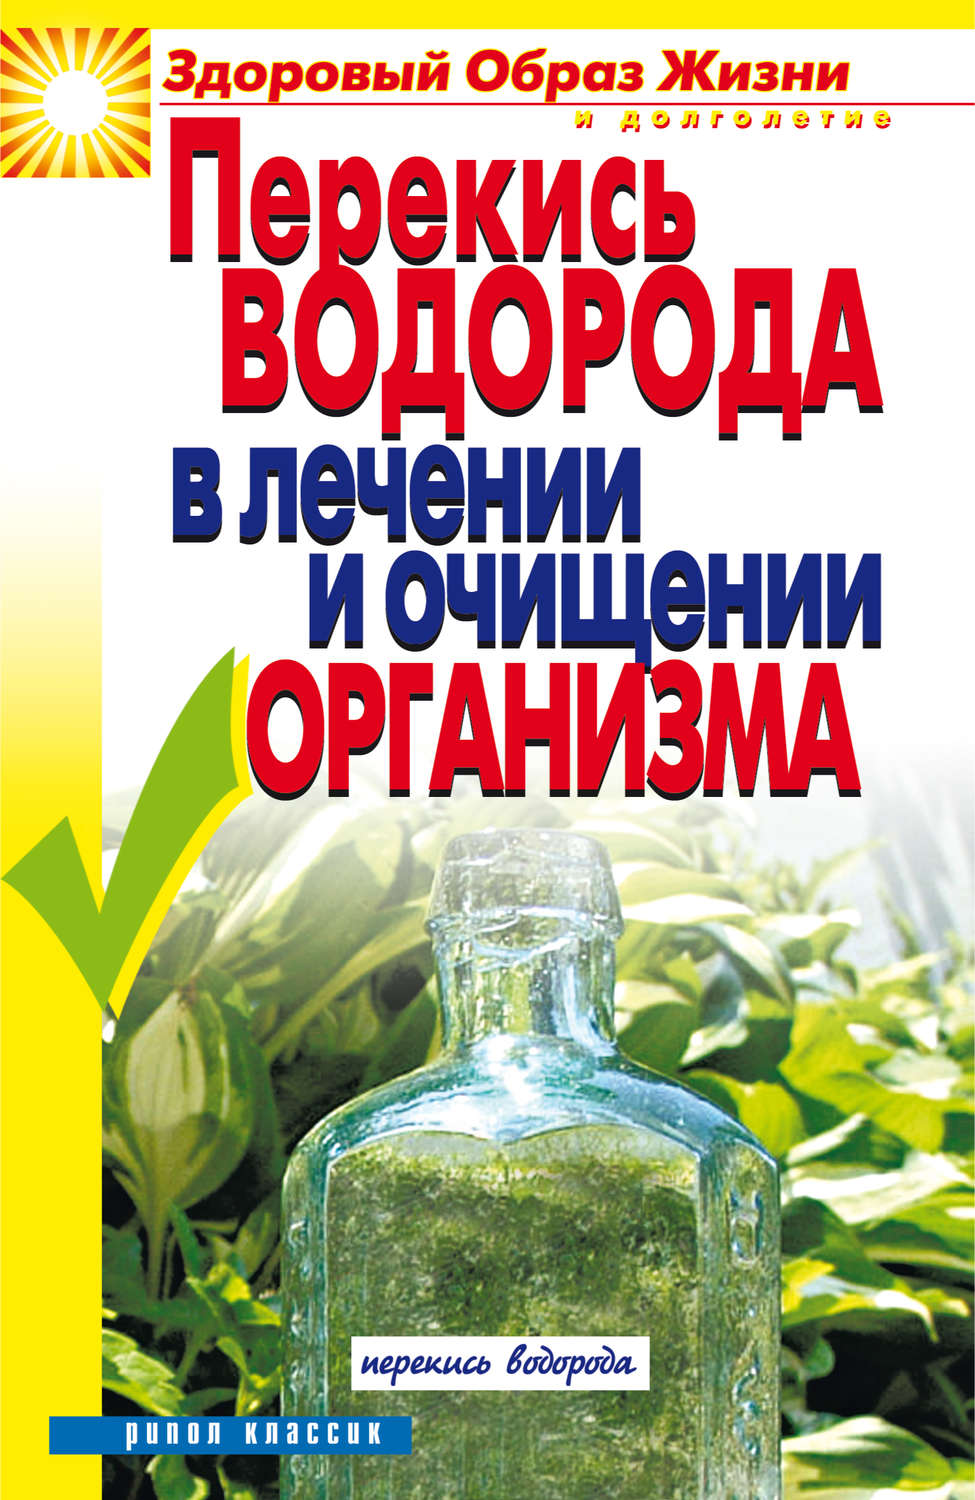 book insecticides in